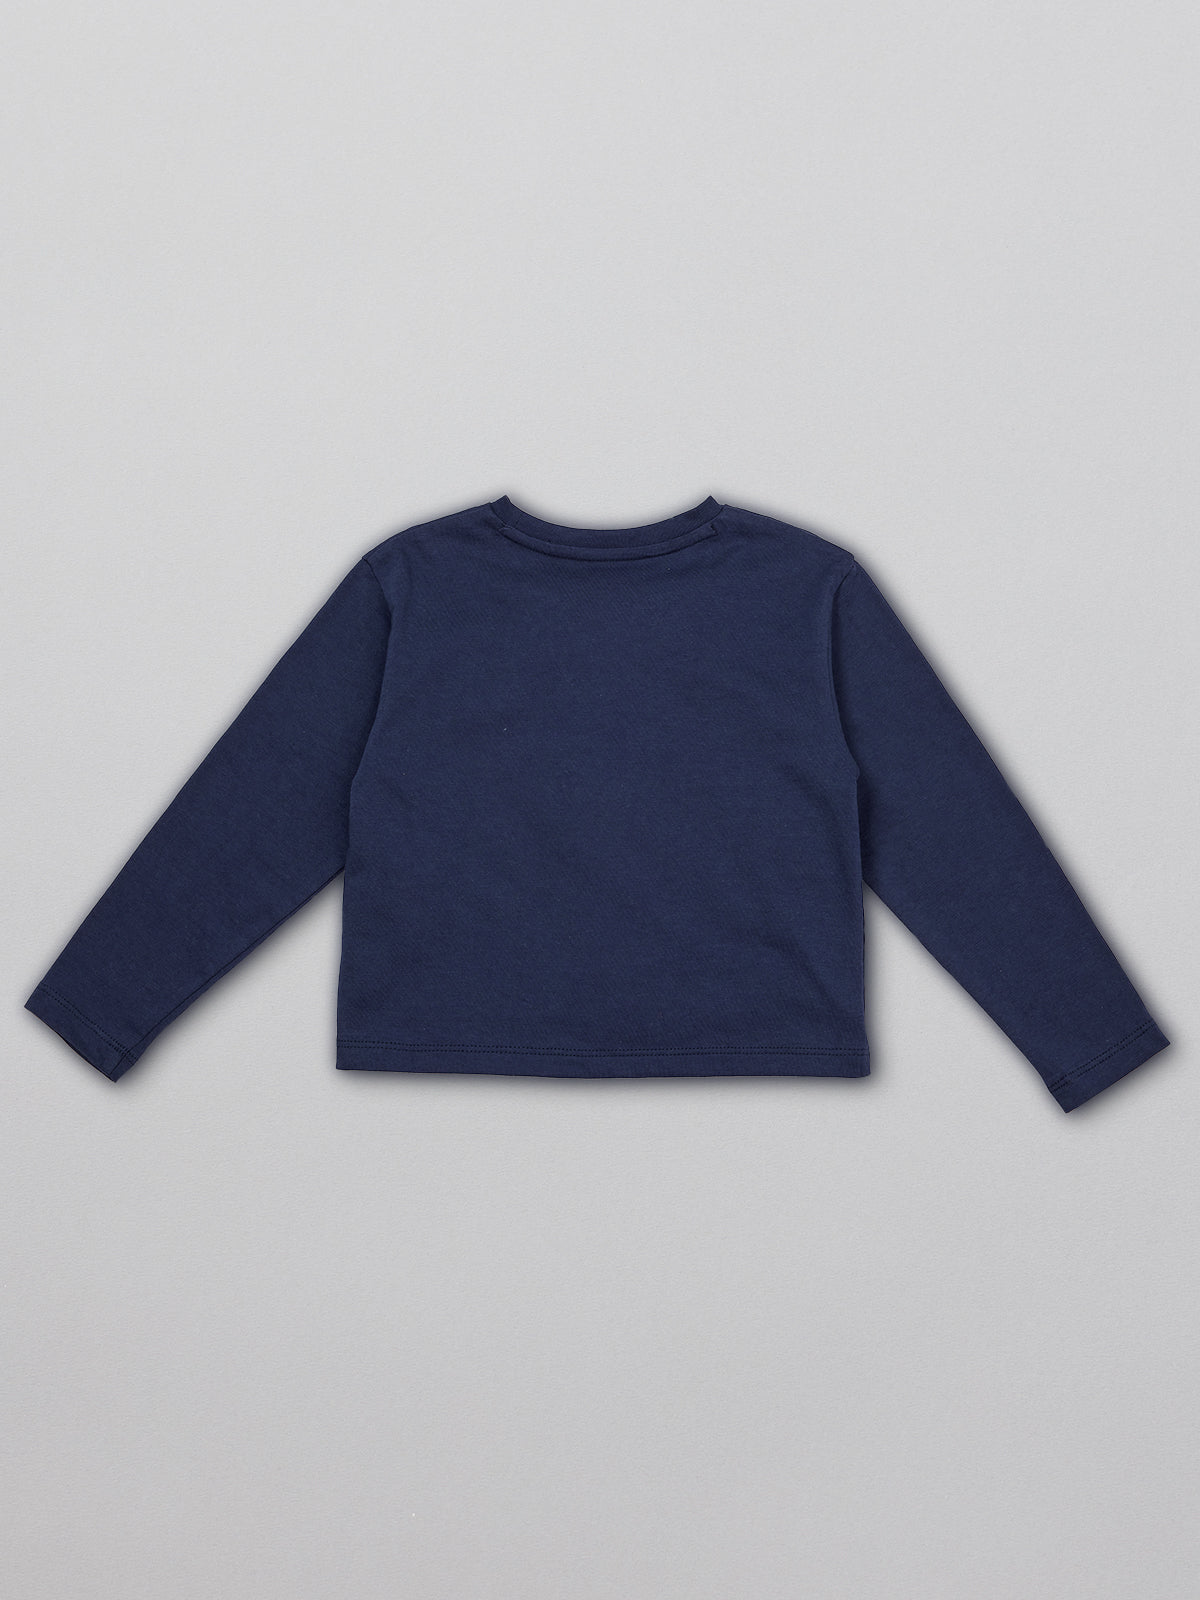 A sustainable kids long sleeved t-shirt in navy blue with a dinosaur print, pictured from the back. 